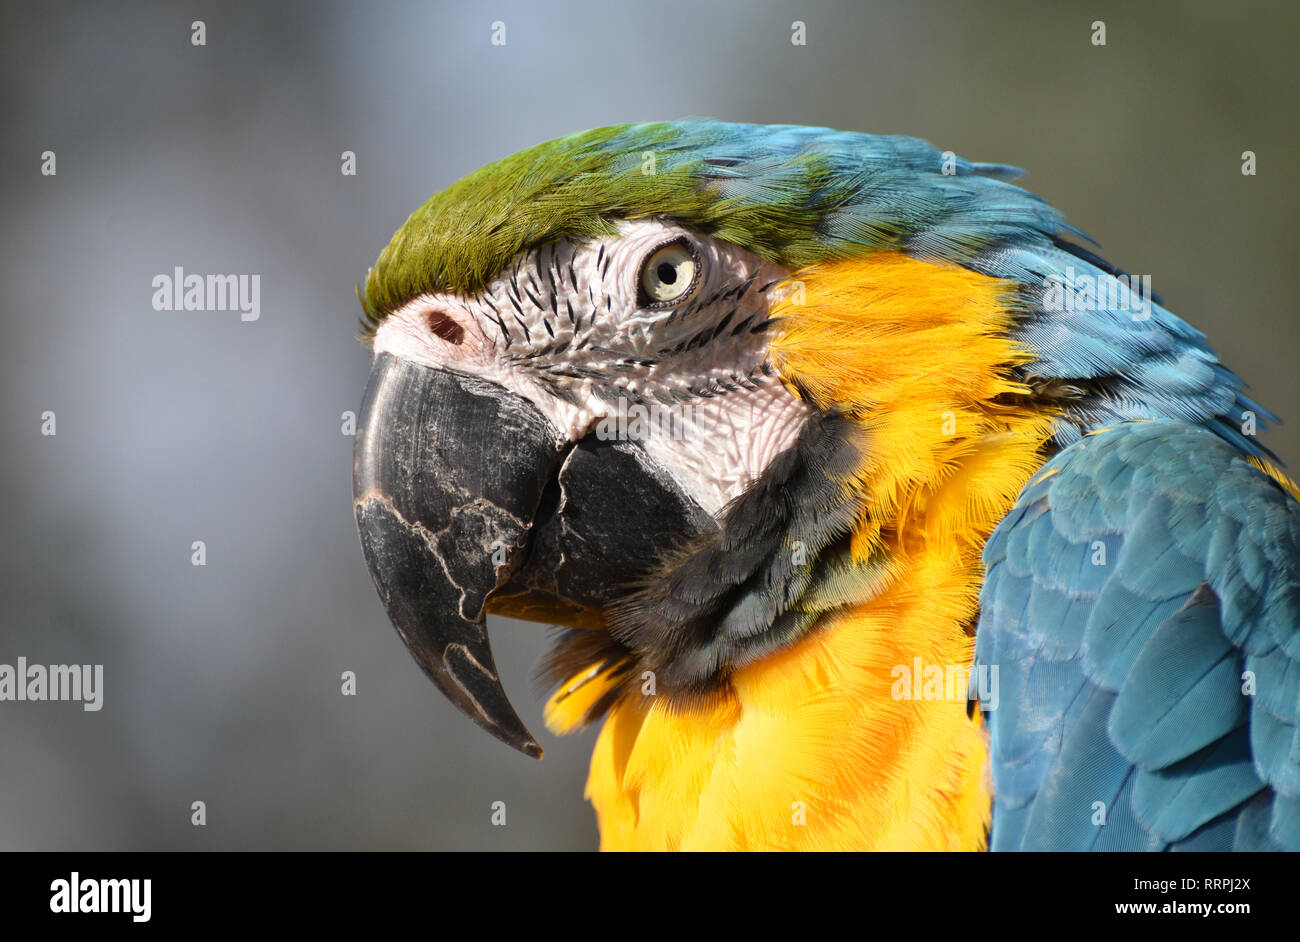 Blue and Gold Macaw / Parrot Stock Photo - Alamy